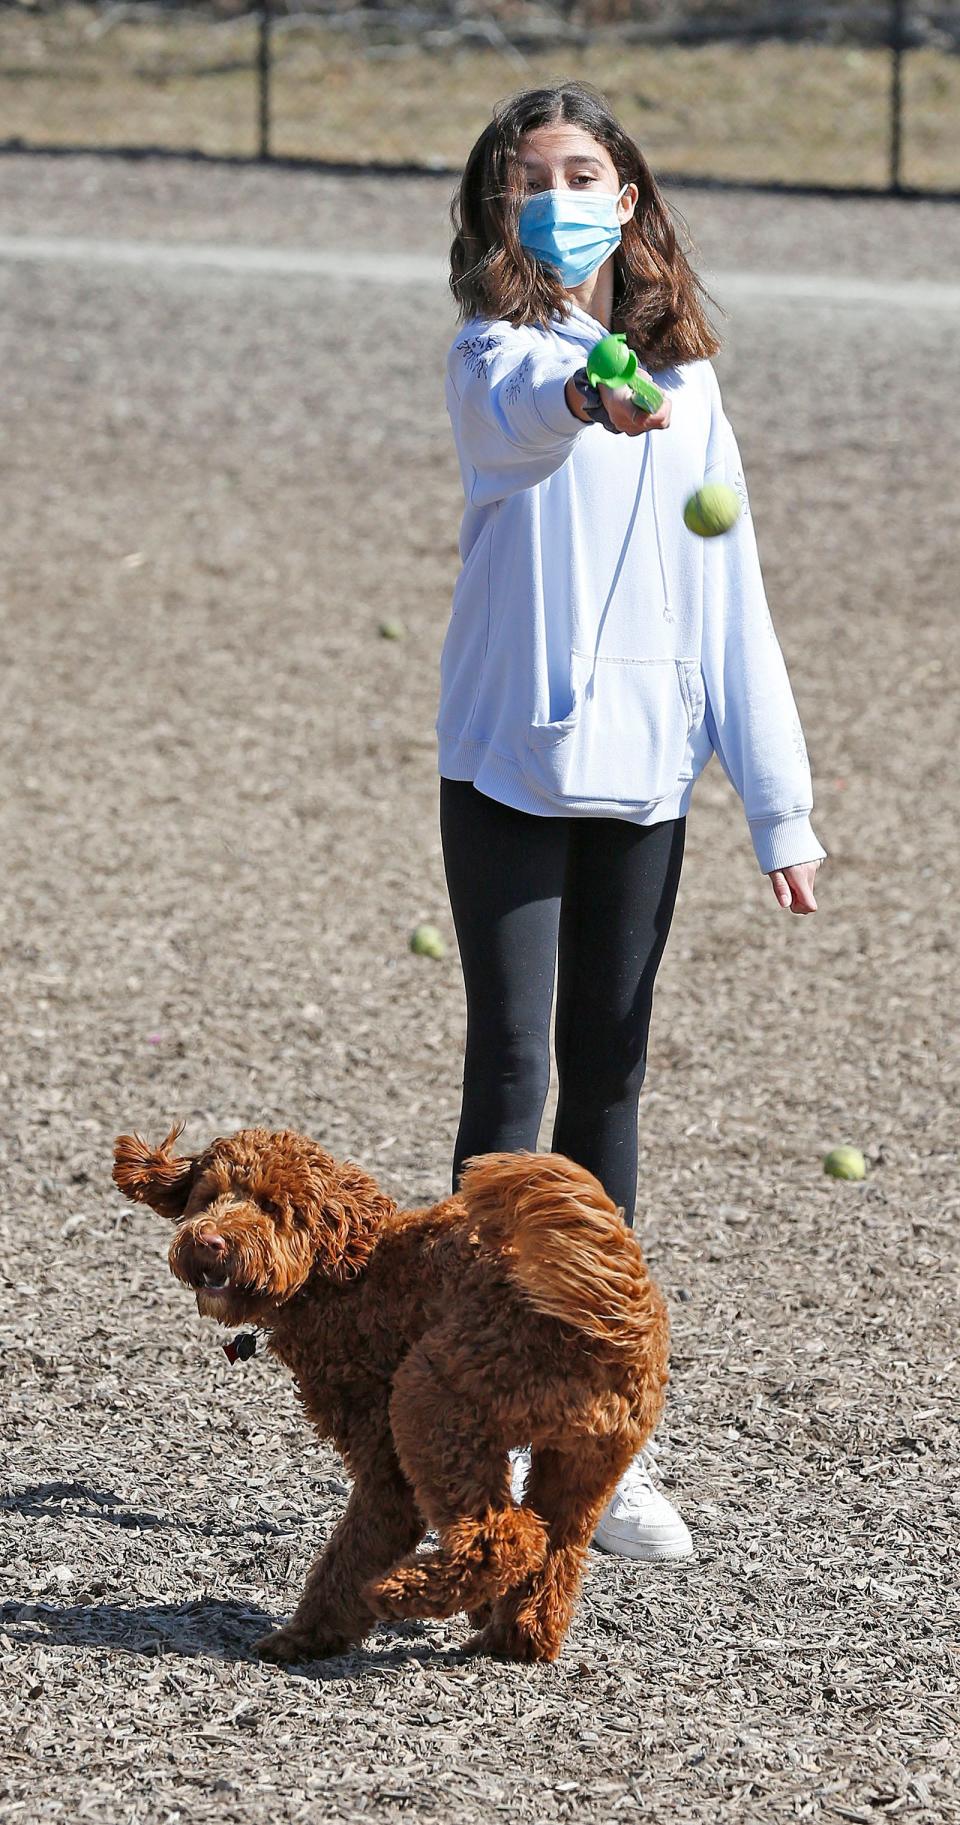 Sofia Eastwood, of Norwell, plays with her new puppy, Finn, at the Scituate Dog Park on Wednesday, March 10, 2021.